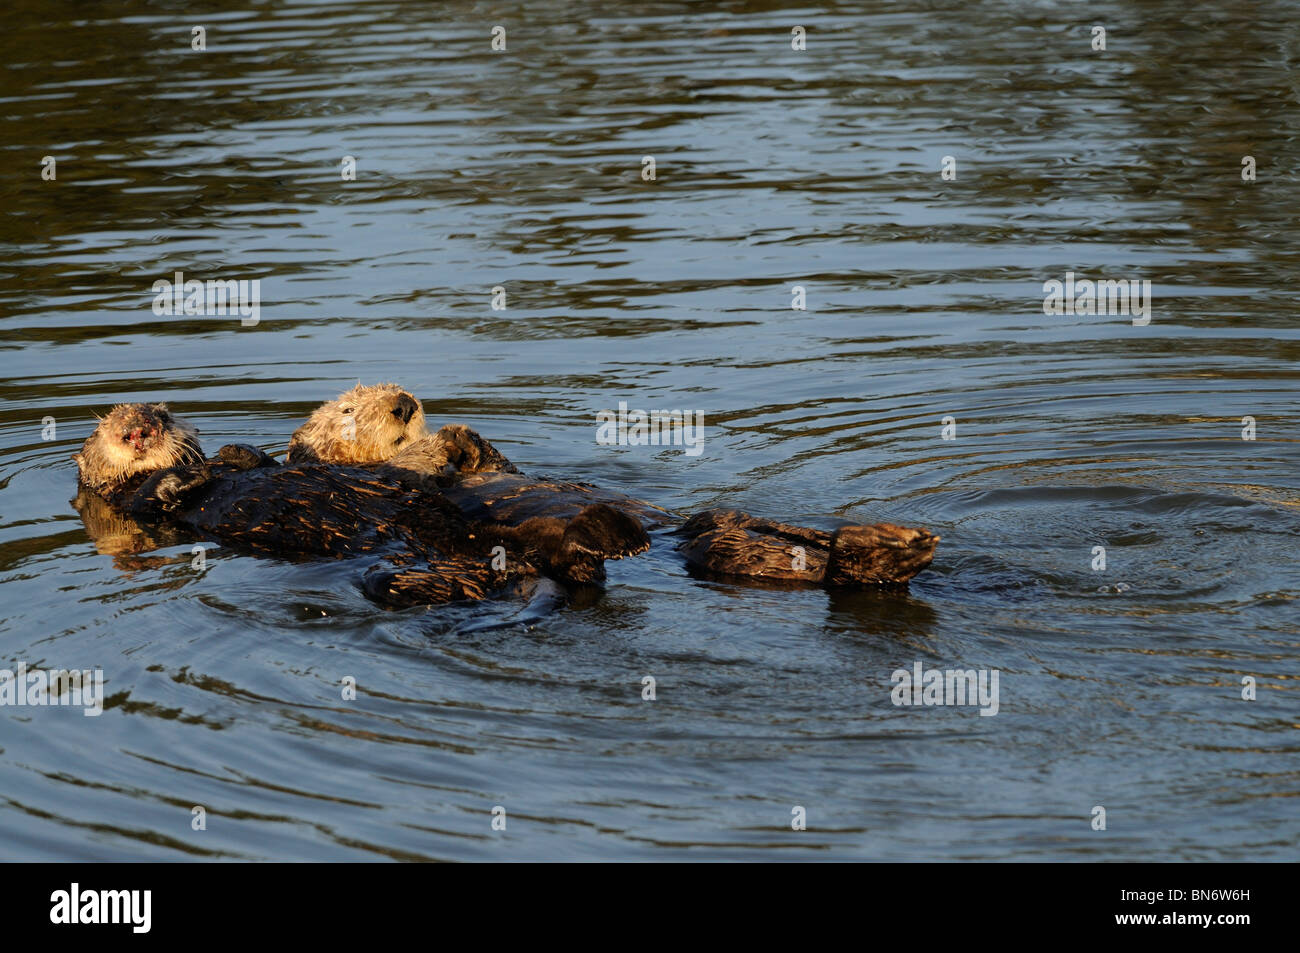 Stock photo of a California sea otter floating in the water on his back. Stock Photo